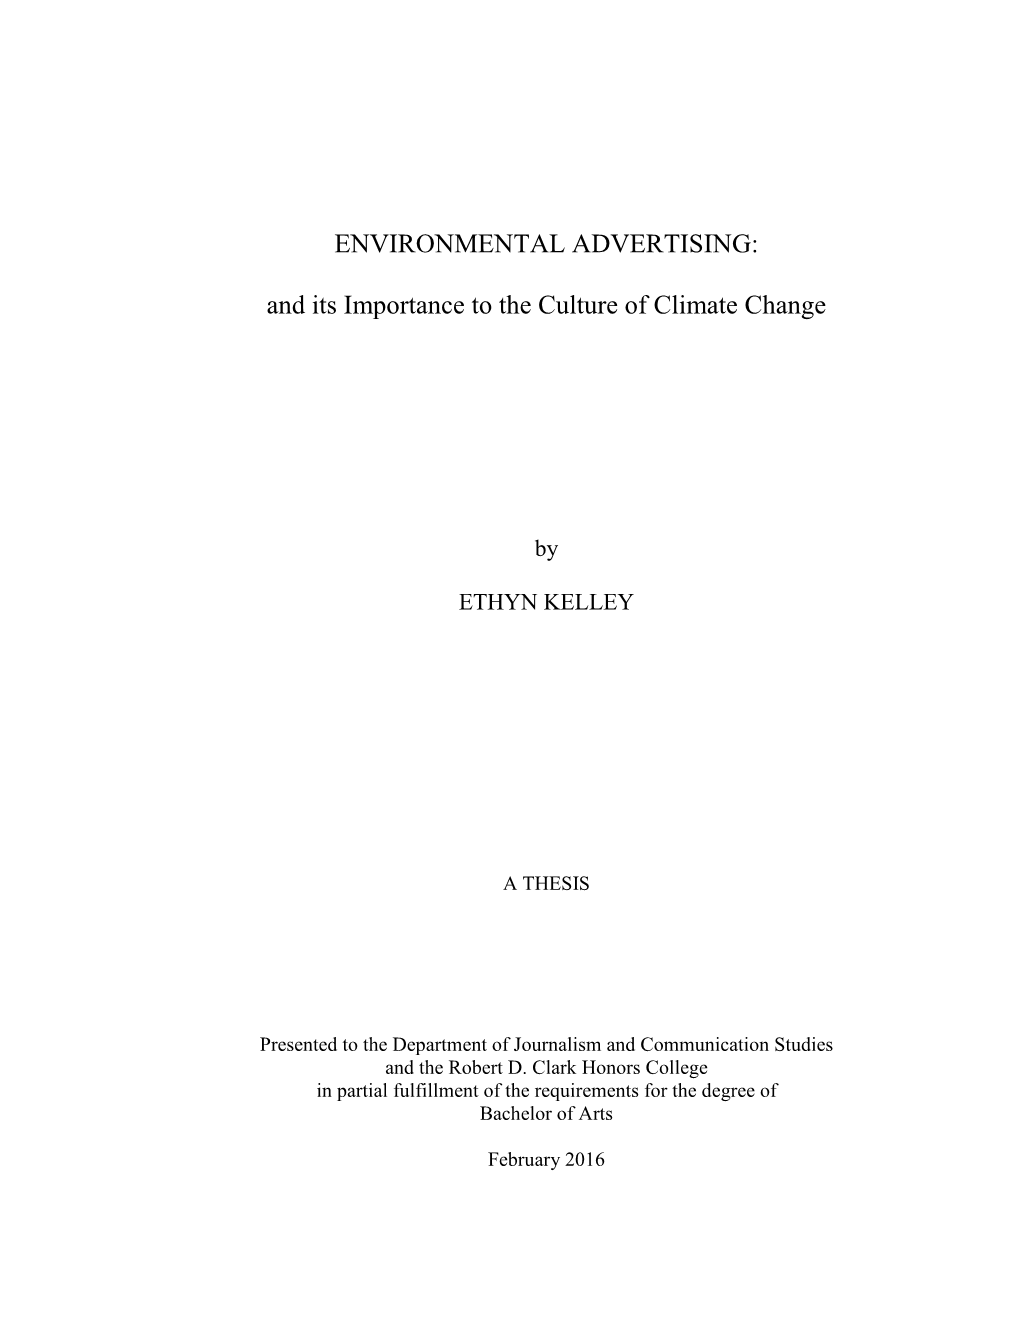 Environmental Advertising: and Its Importance to the Culture of Climate Change